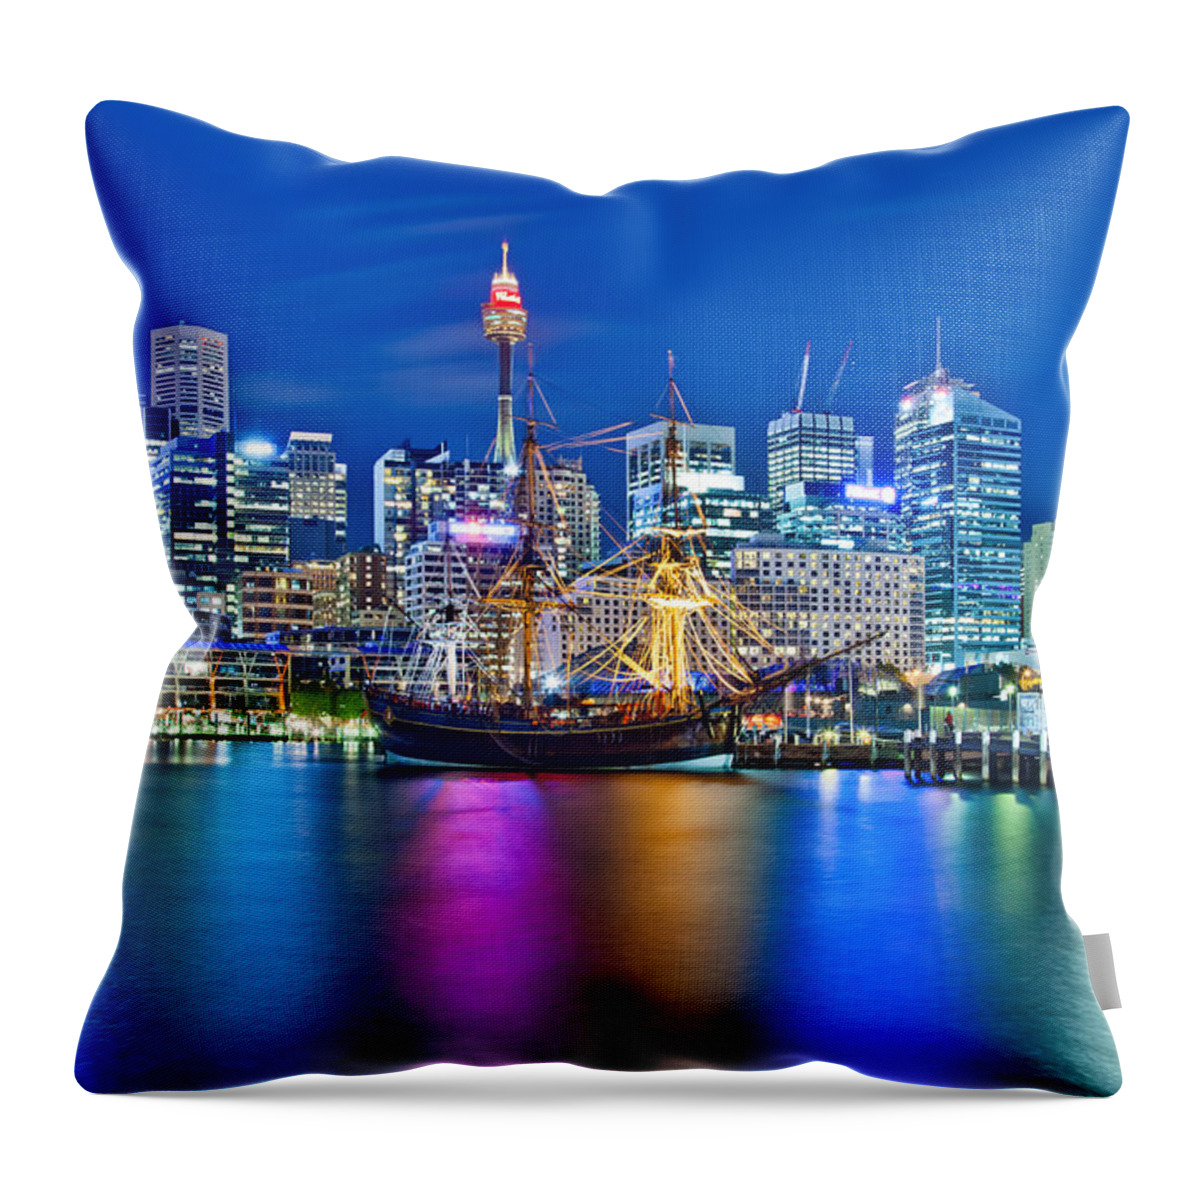 Sydney Throw Pillow featuring the photograph Vibrant Darling Harbour by Az Jackson